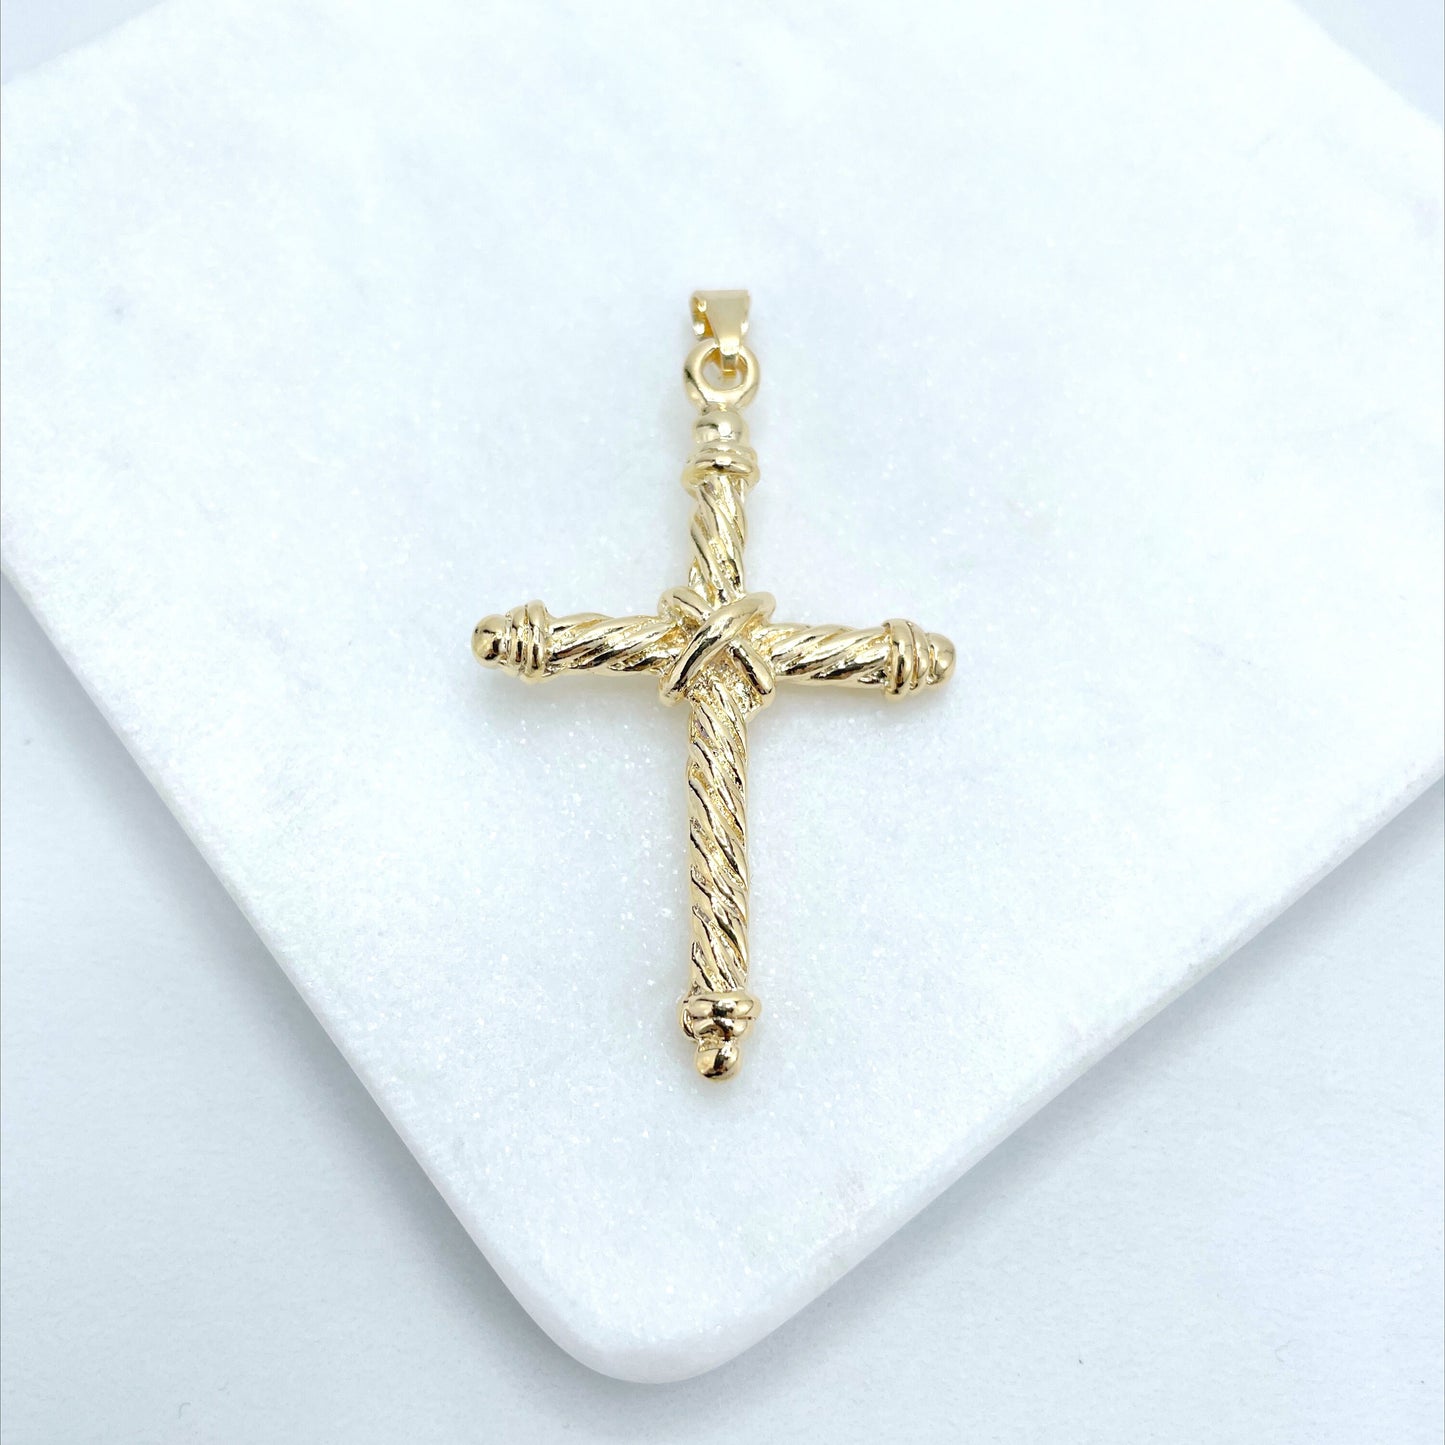 18k Gold Filled Textured Braid Rope Cross Charms Pendant, Religious Jewelry, Wholesale Jewelry Making Supplies